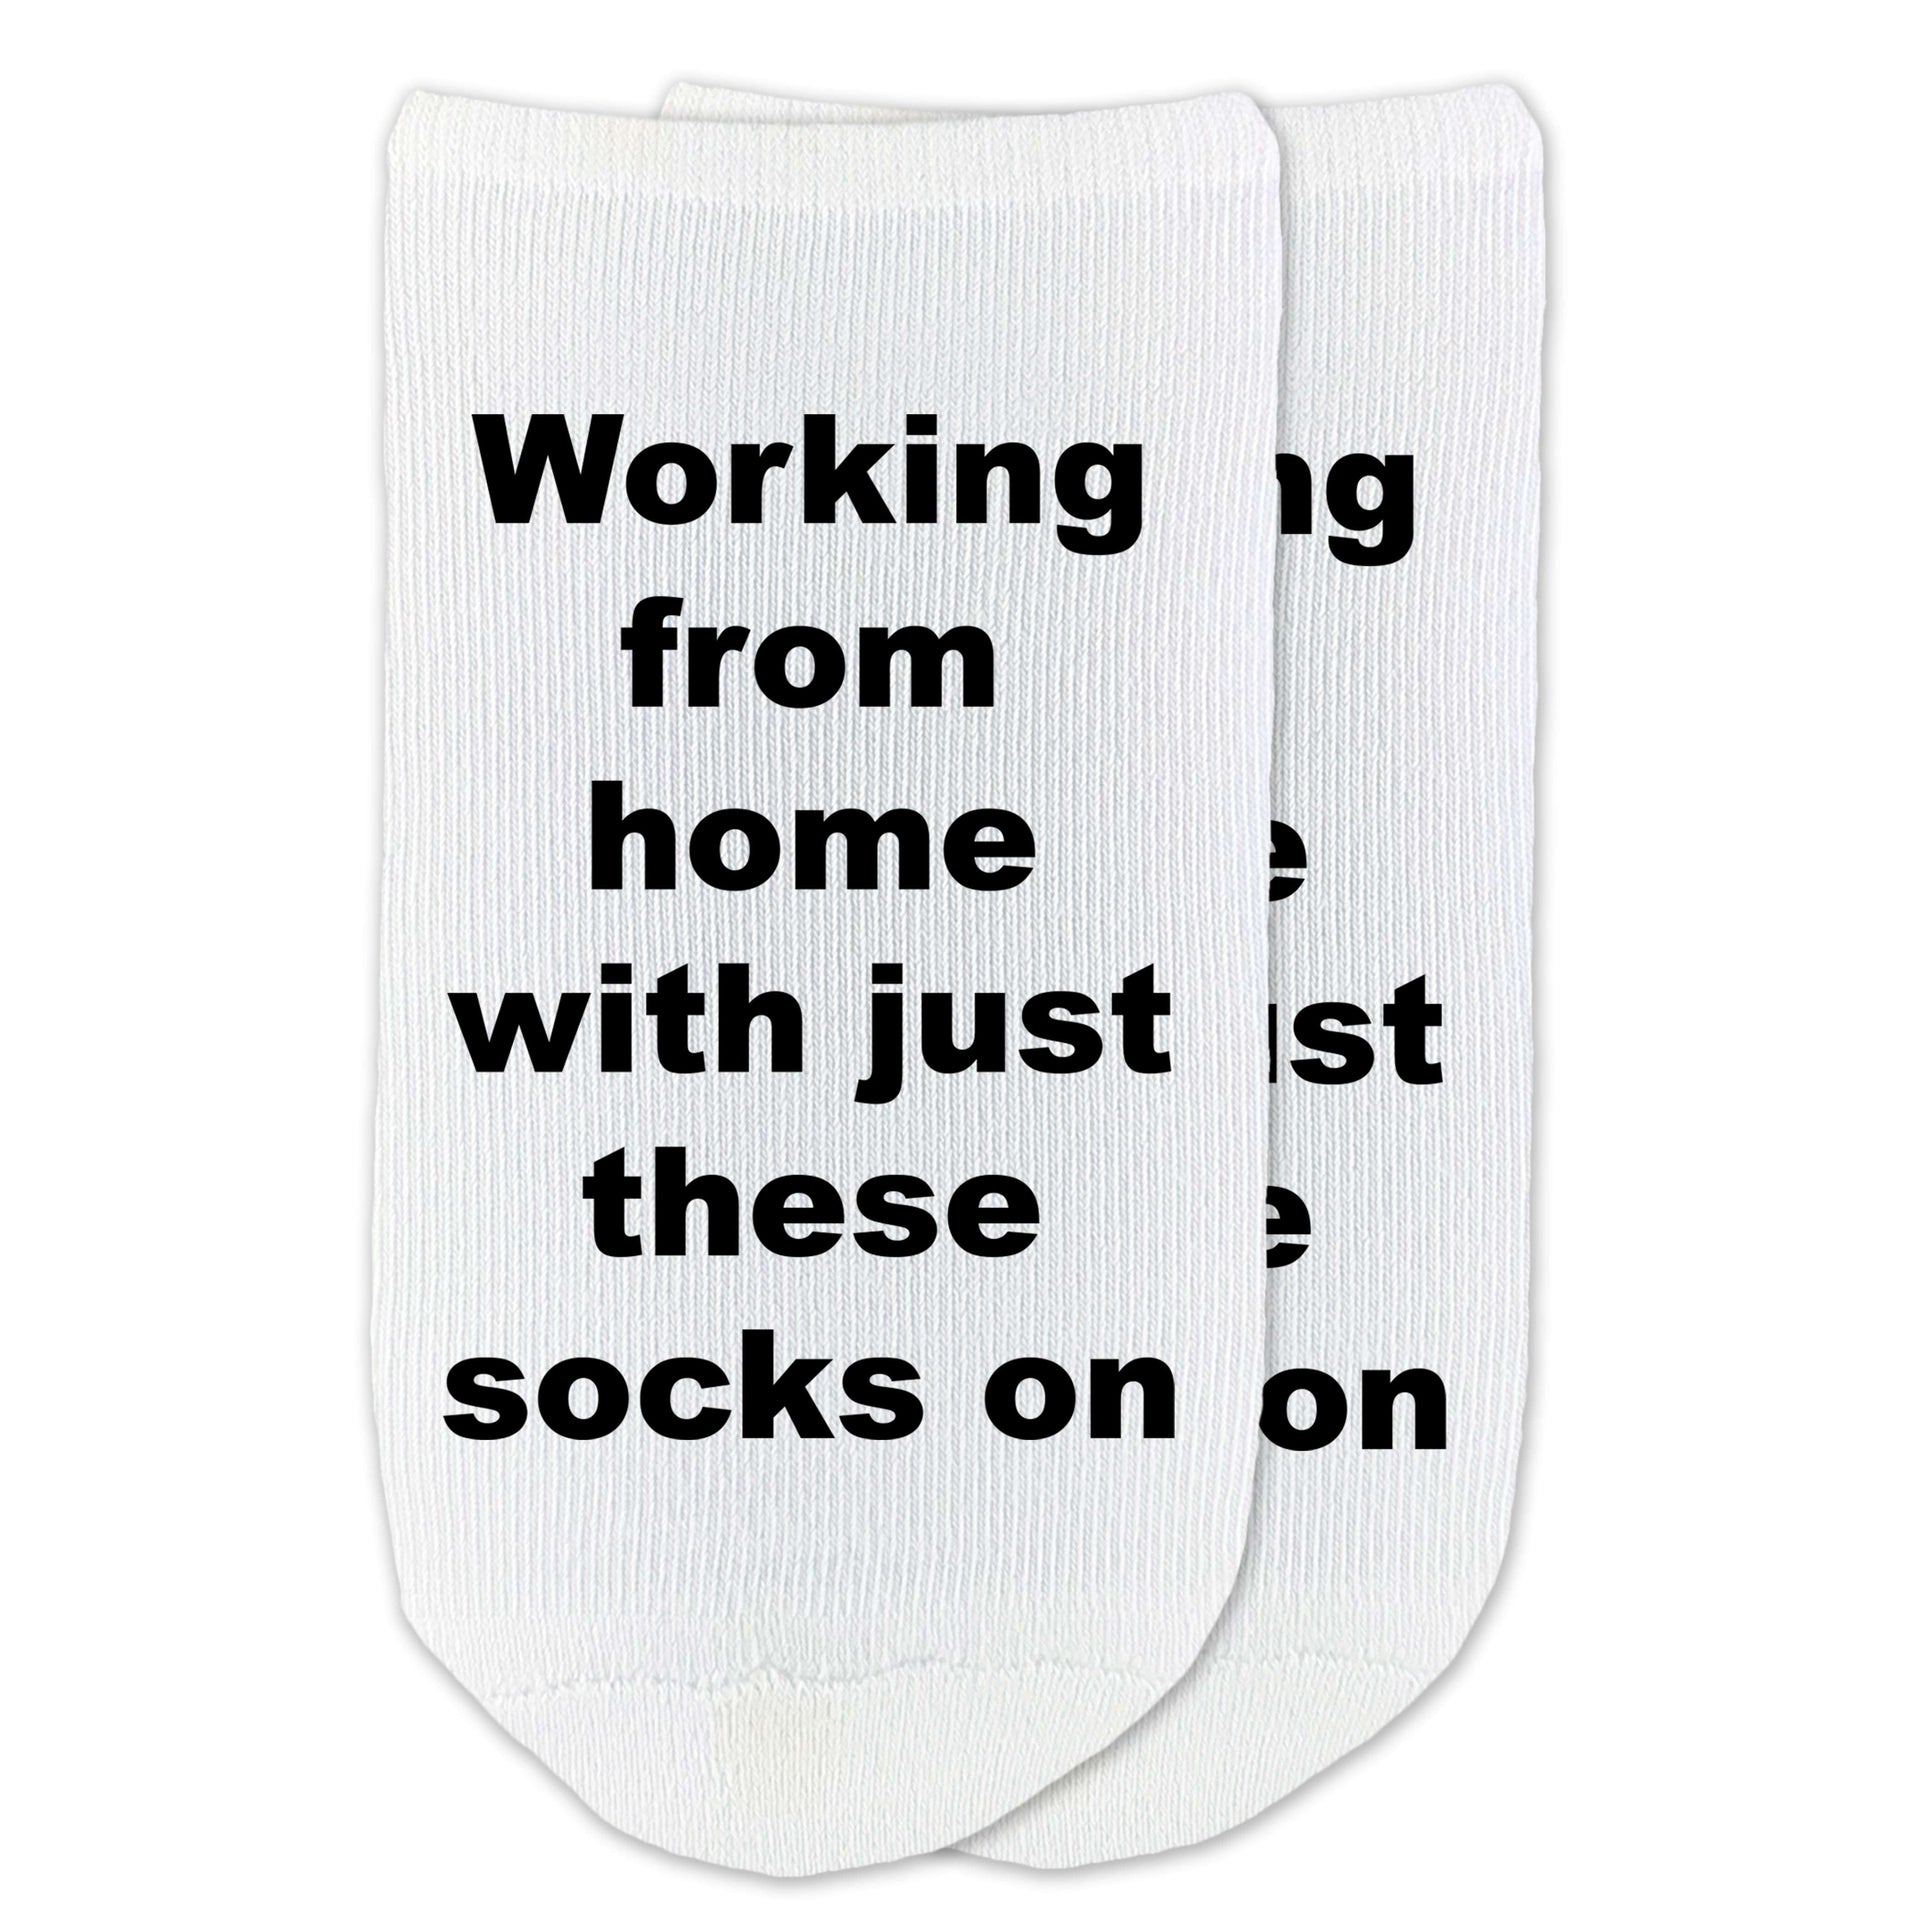 Working from home with just these socks on custom printed on no show socks.